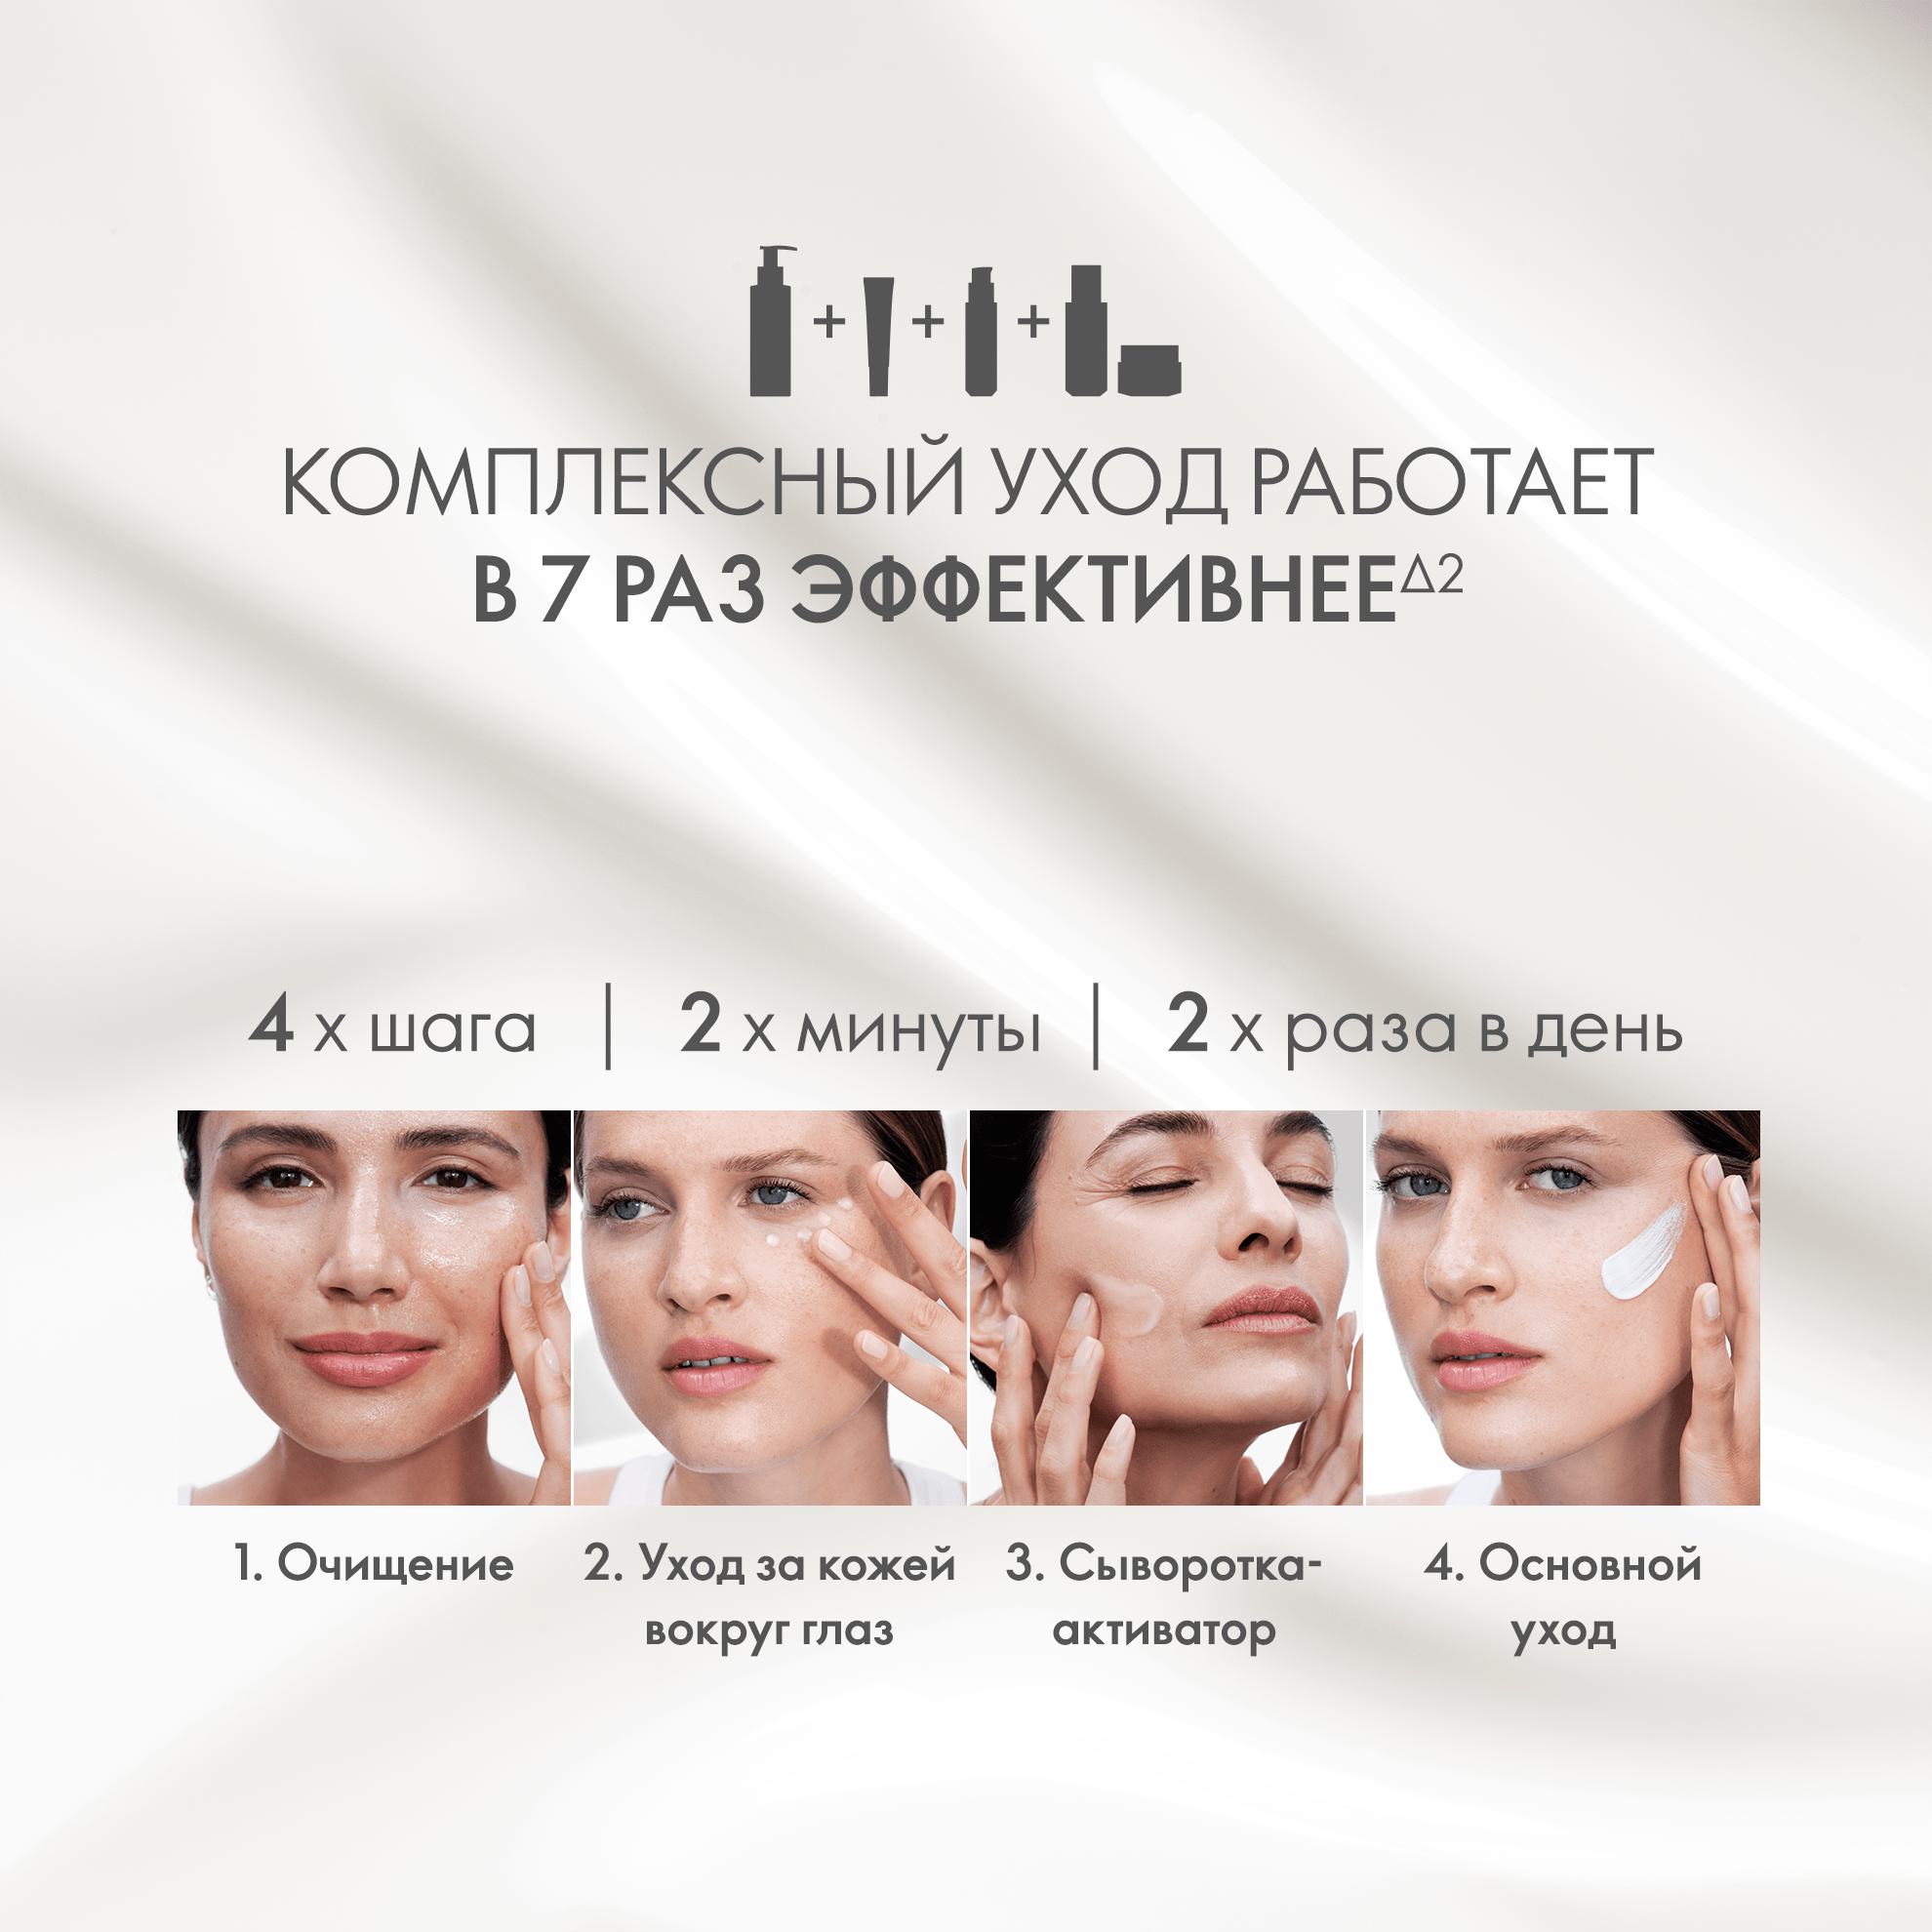 https://media-cdn.oriflame.com/productImage?externalMediaId=product-management-media%2fProducts%2f45590%2fRU%2f45590_5.png&id=19151112&version=1